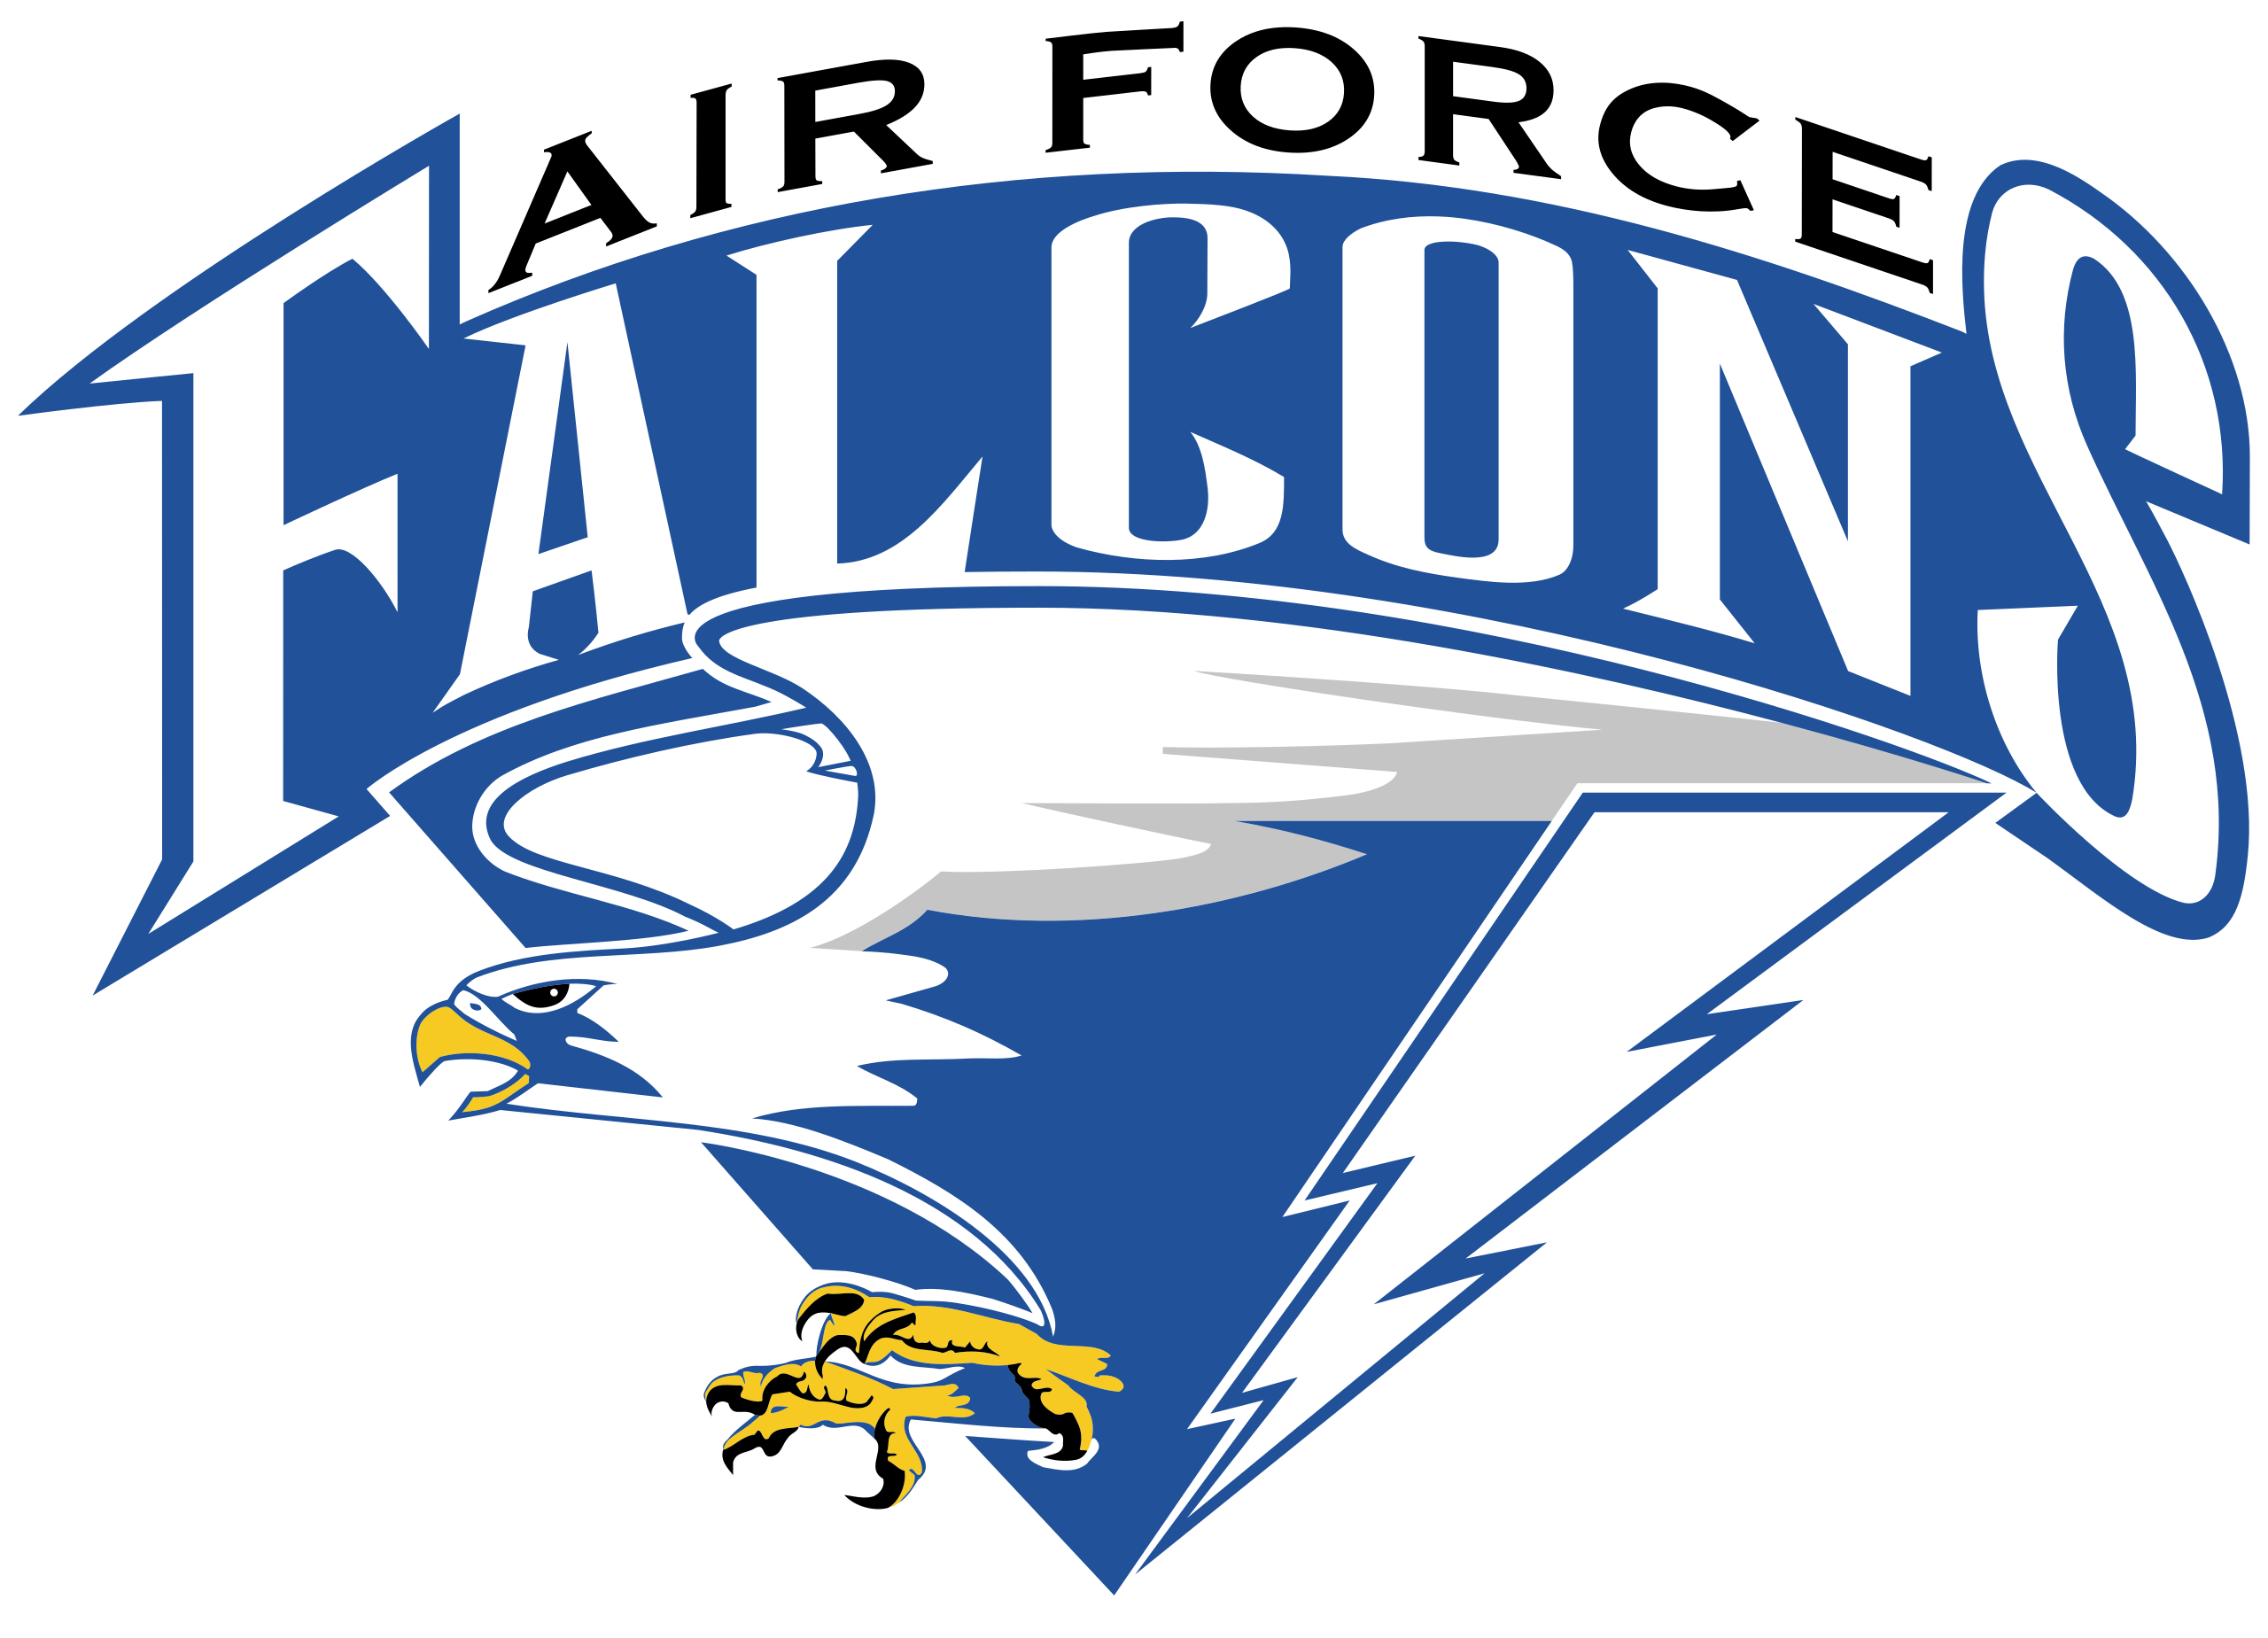 File:Air Force Falcons.svg - Wikipedia